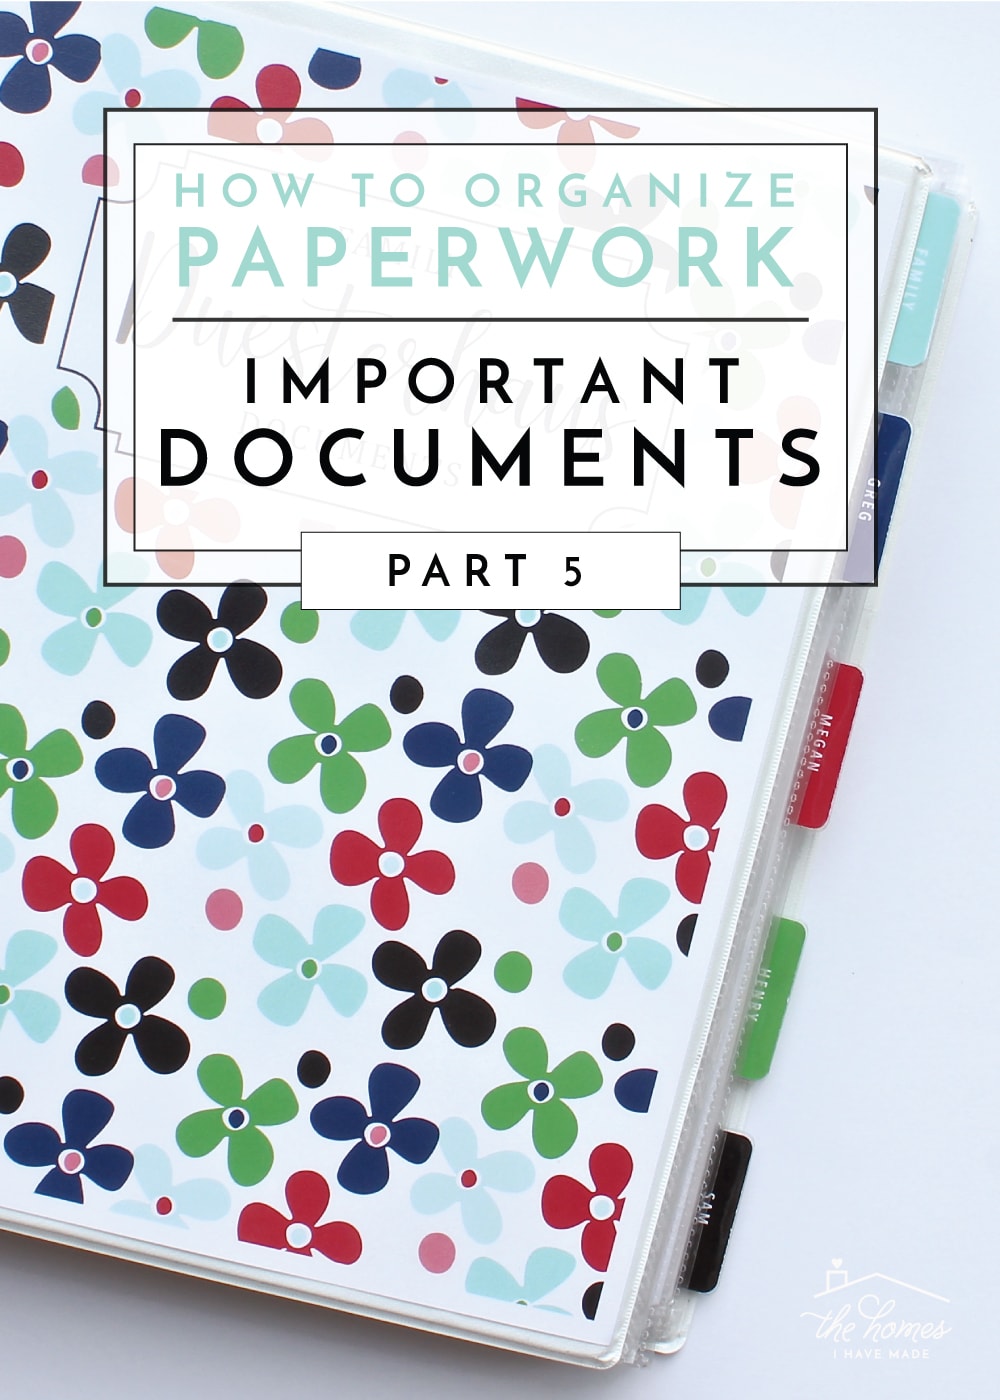 How To Organize Paperwork Part 5 Creating An Important Documents Binder The Homes I Have Made